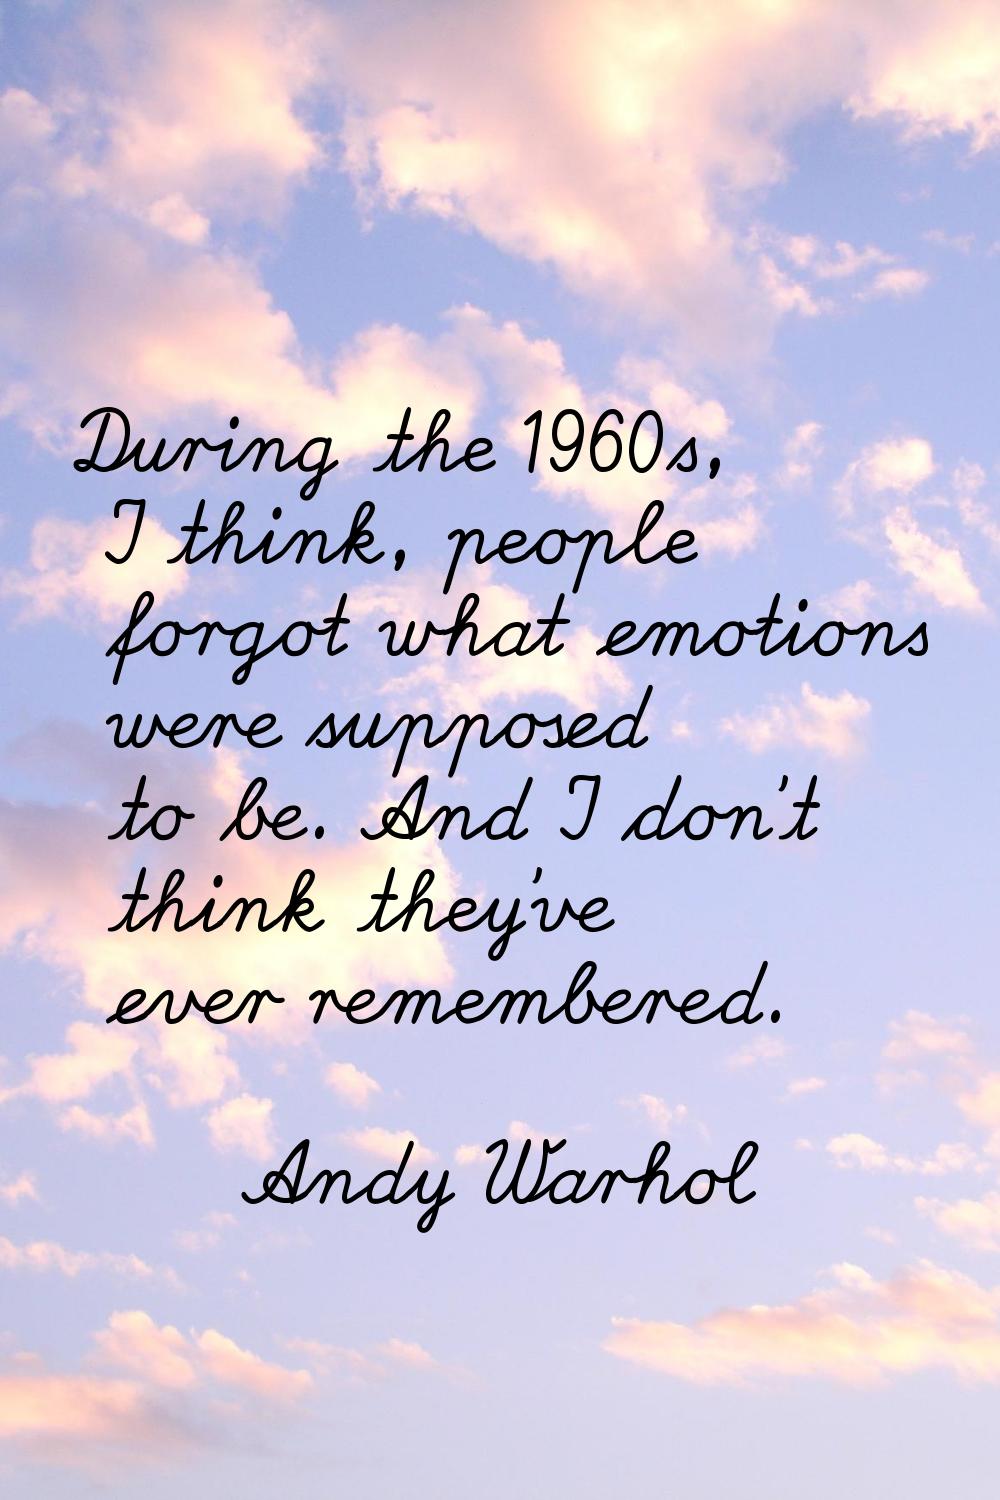 During the 1960s, I think, people forgot what emotions were supposed to be. And I don't think they'